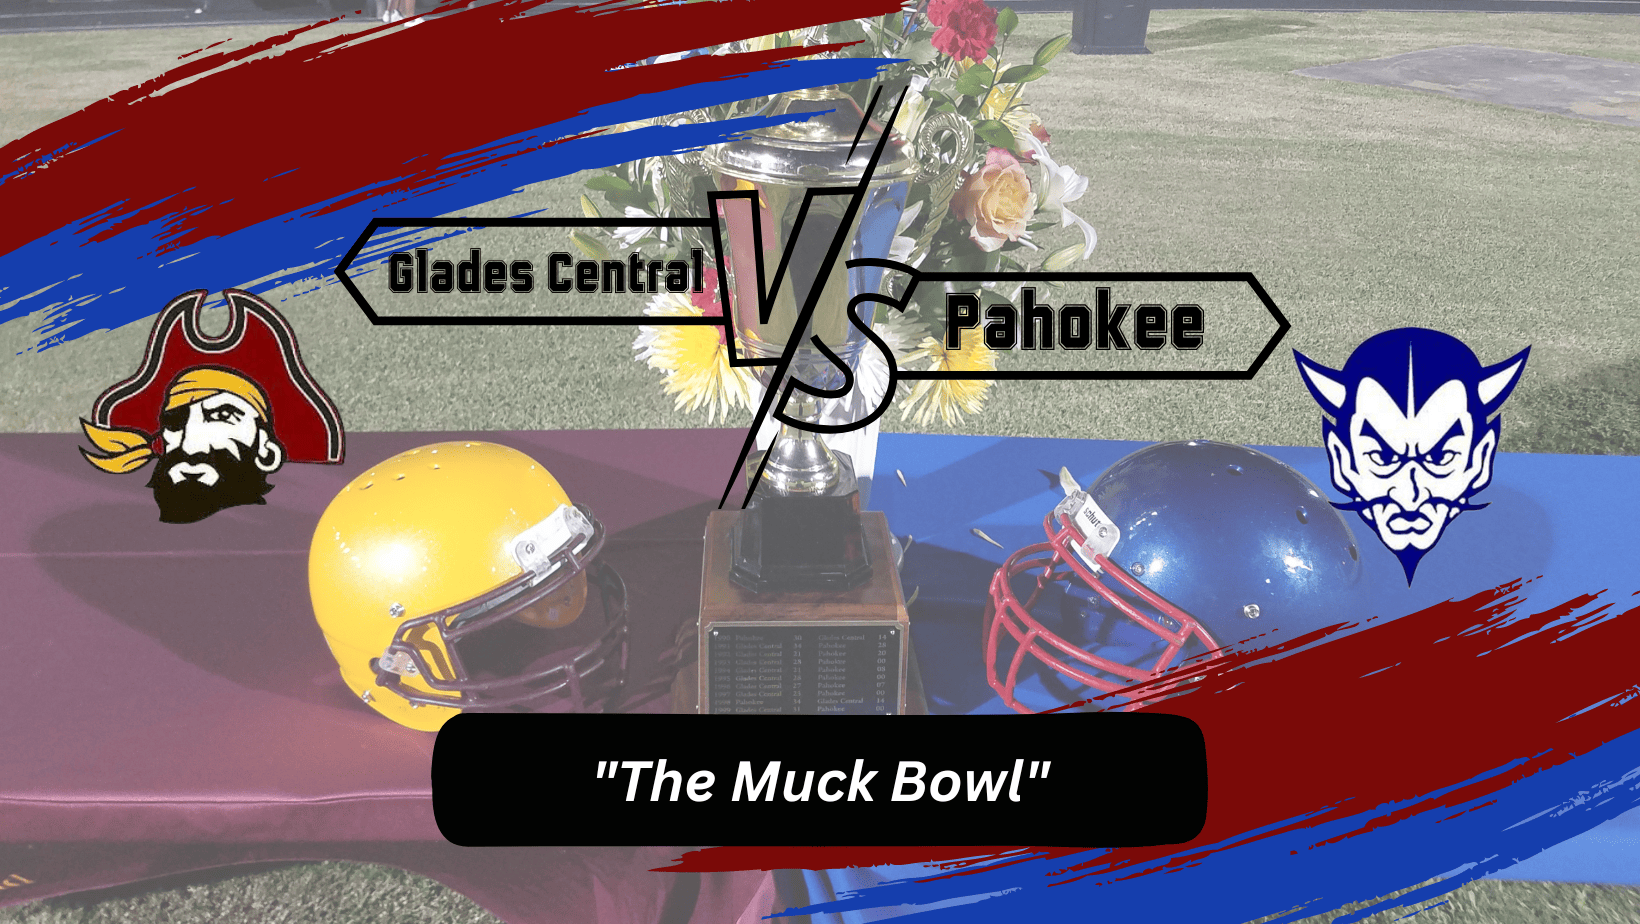 Glades Central Pakochee The Muck Bowl